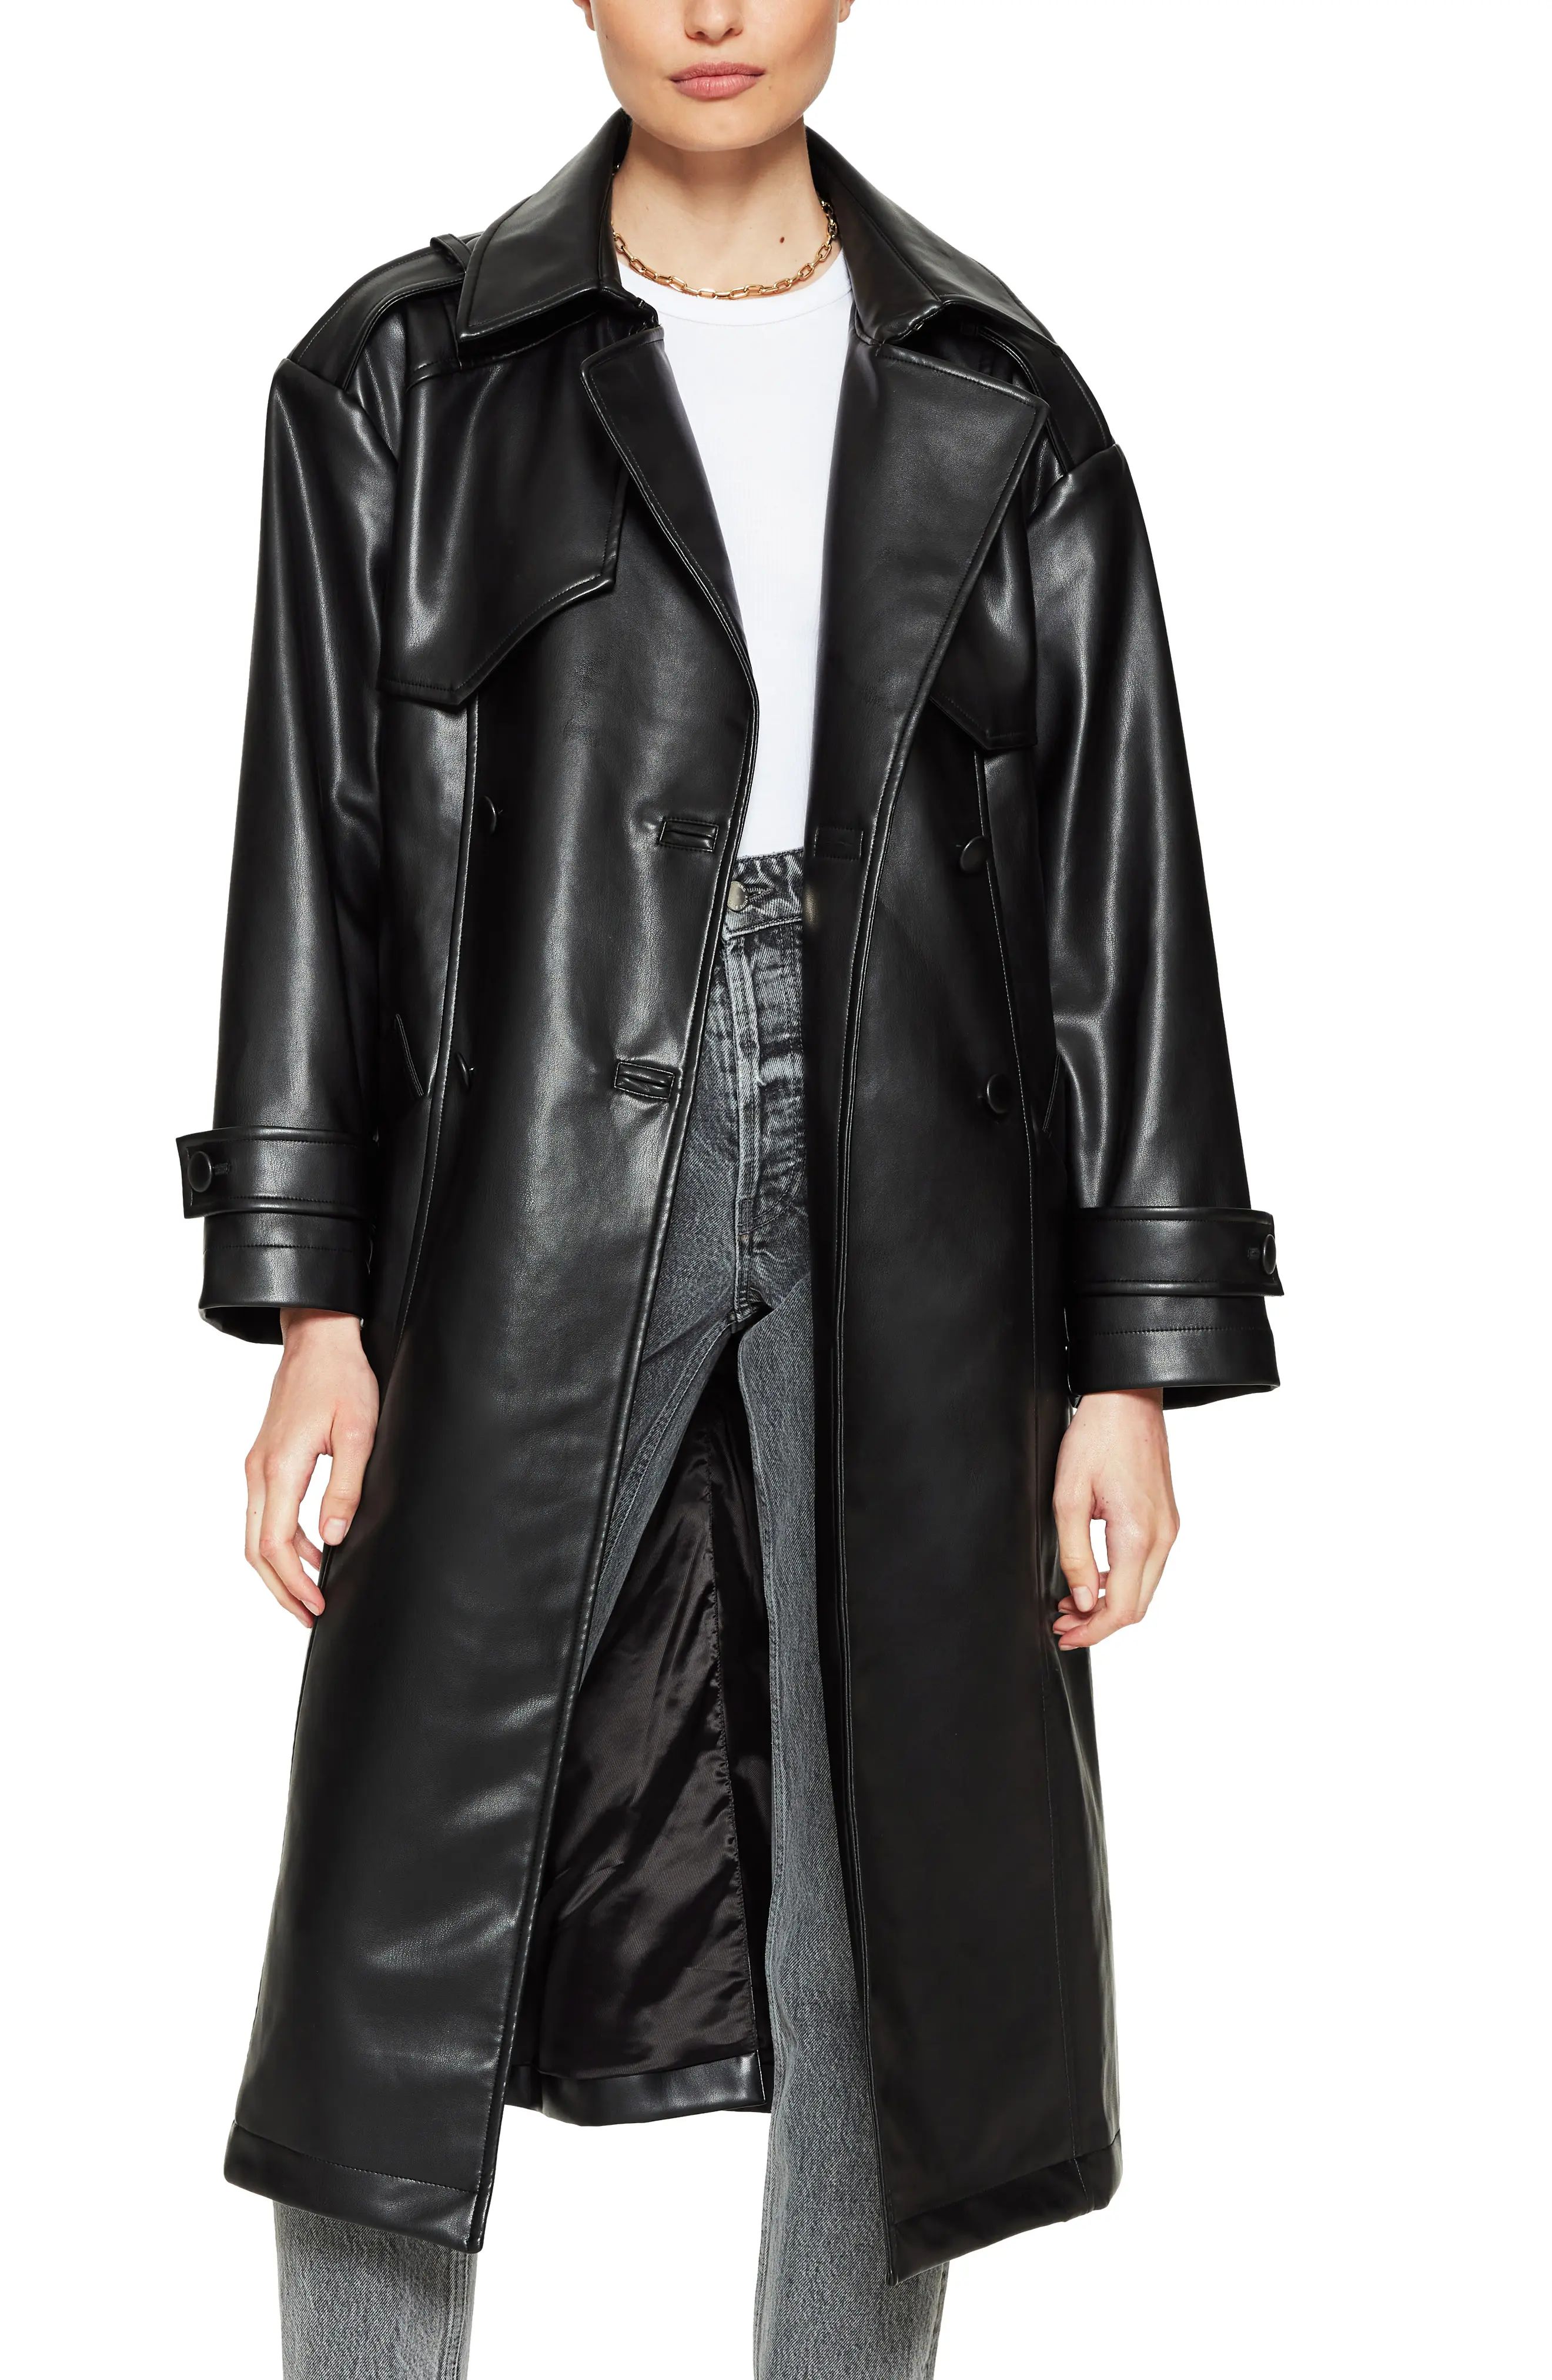 ANINE BING Finley Faux Leather Trench Coat, Size Medium in Black at Nordstrom | Nordstrom